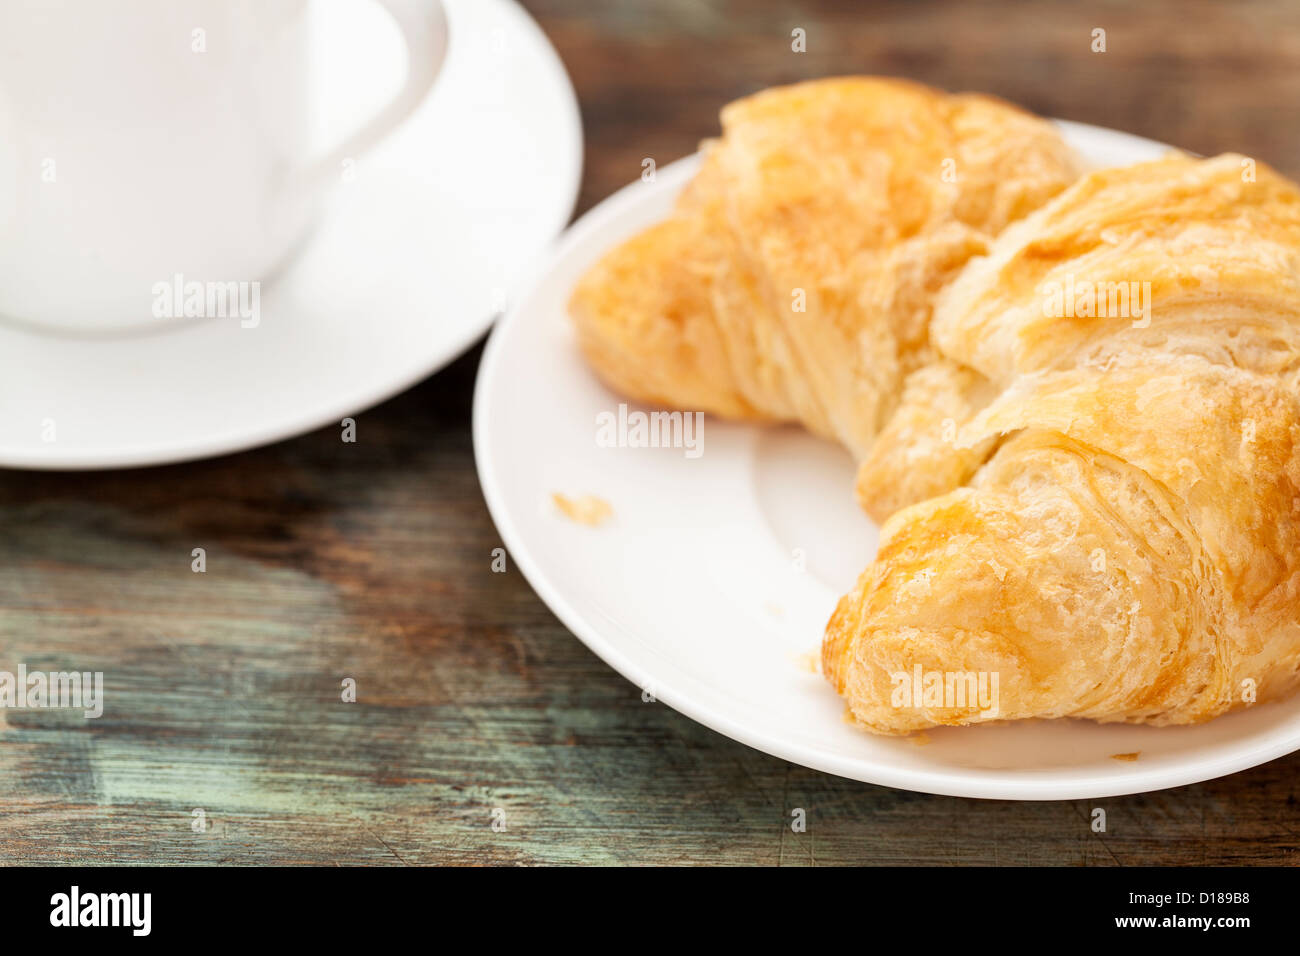 croissant roll with espresso coffee cup on grunge painted wooden table, shallow depth of field Stock Photo